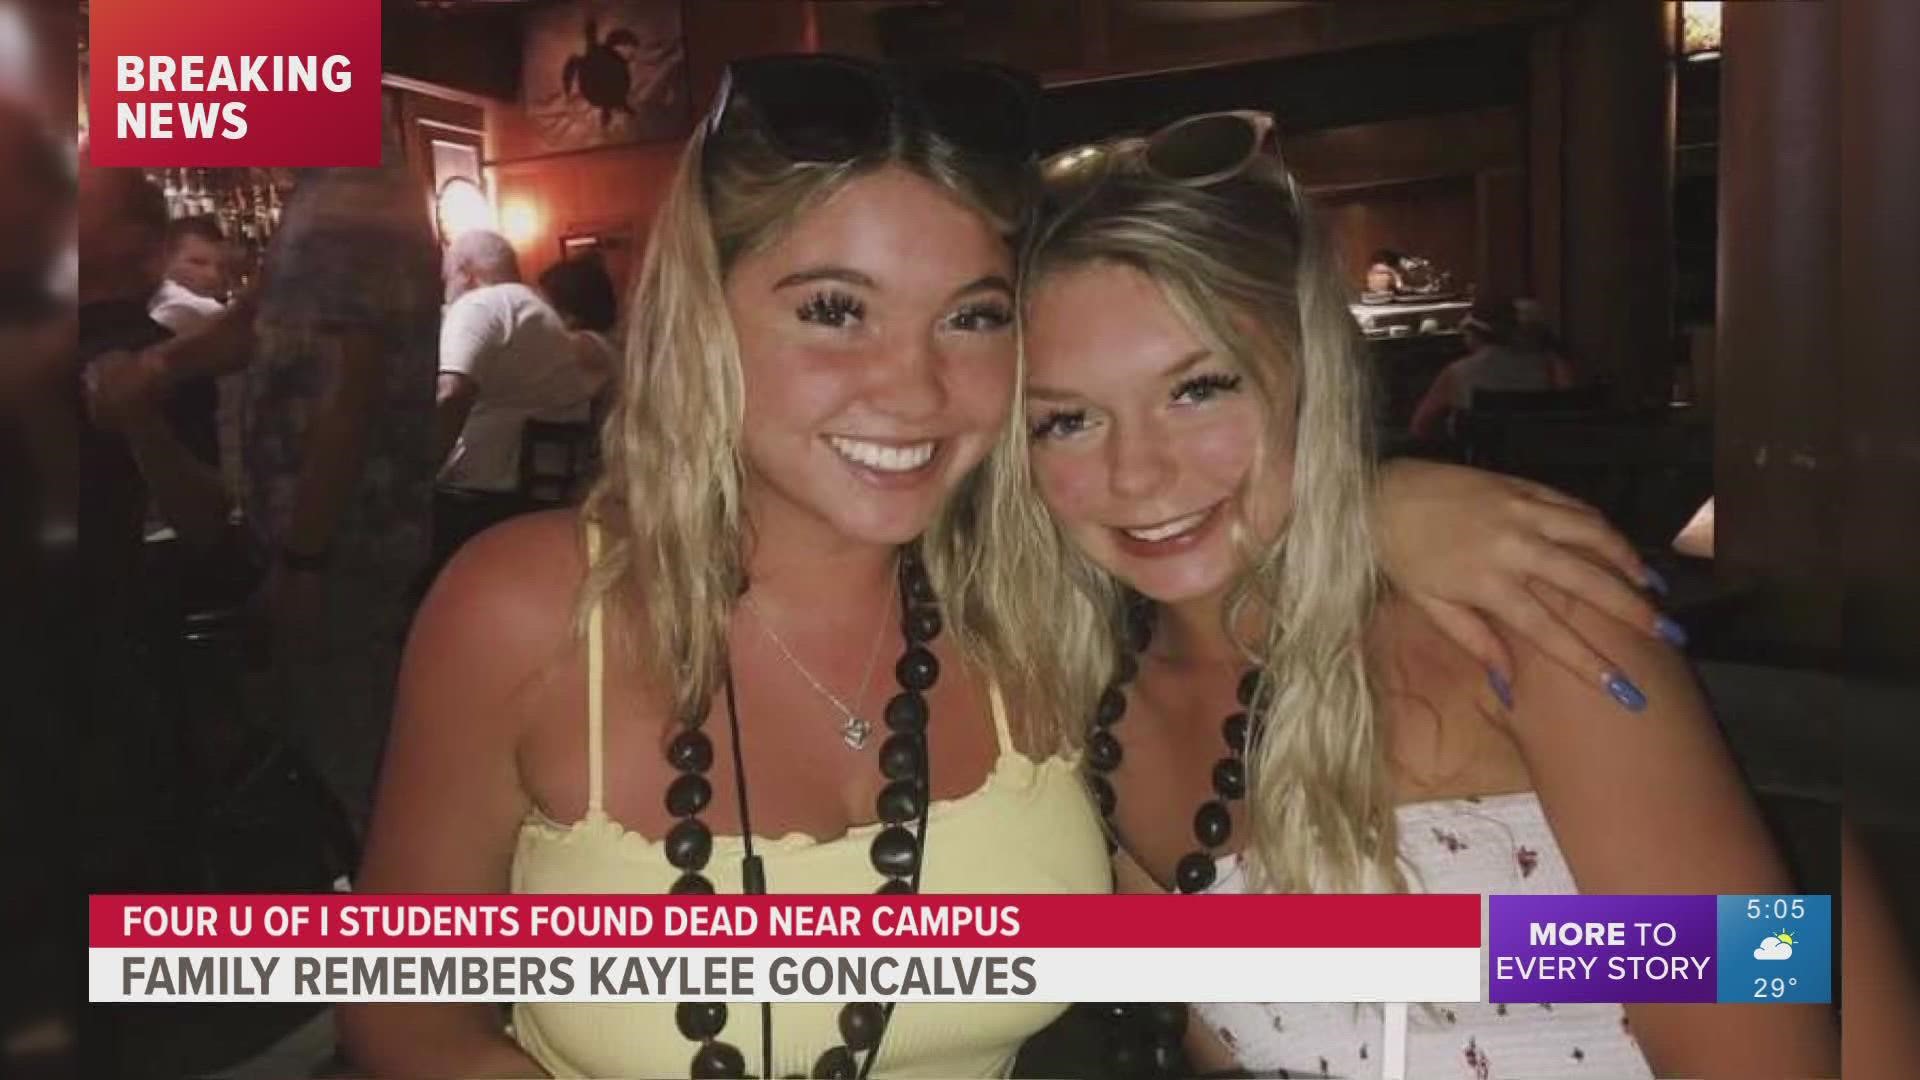 The family of Kaylee GonCalves urges the public to wait for the truth.